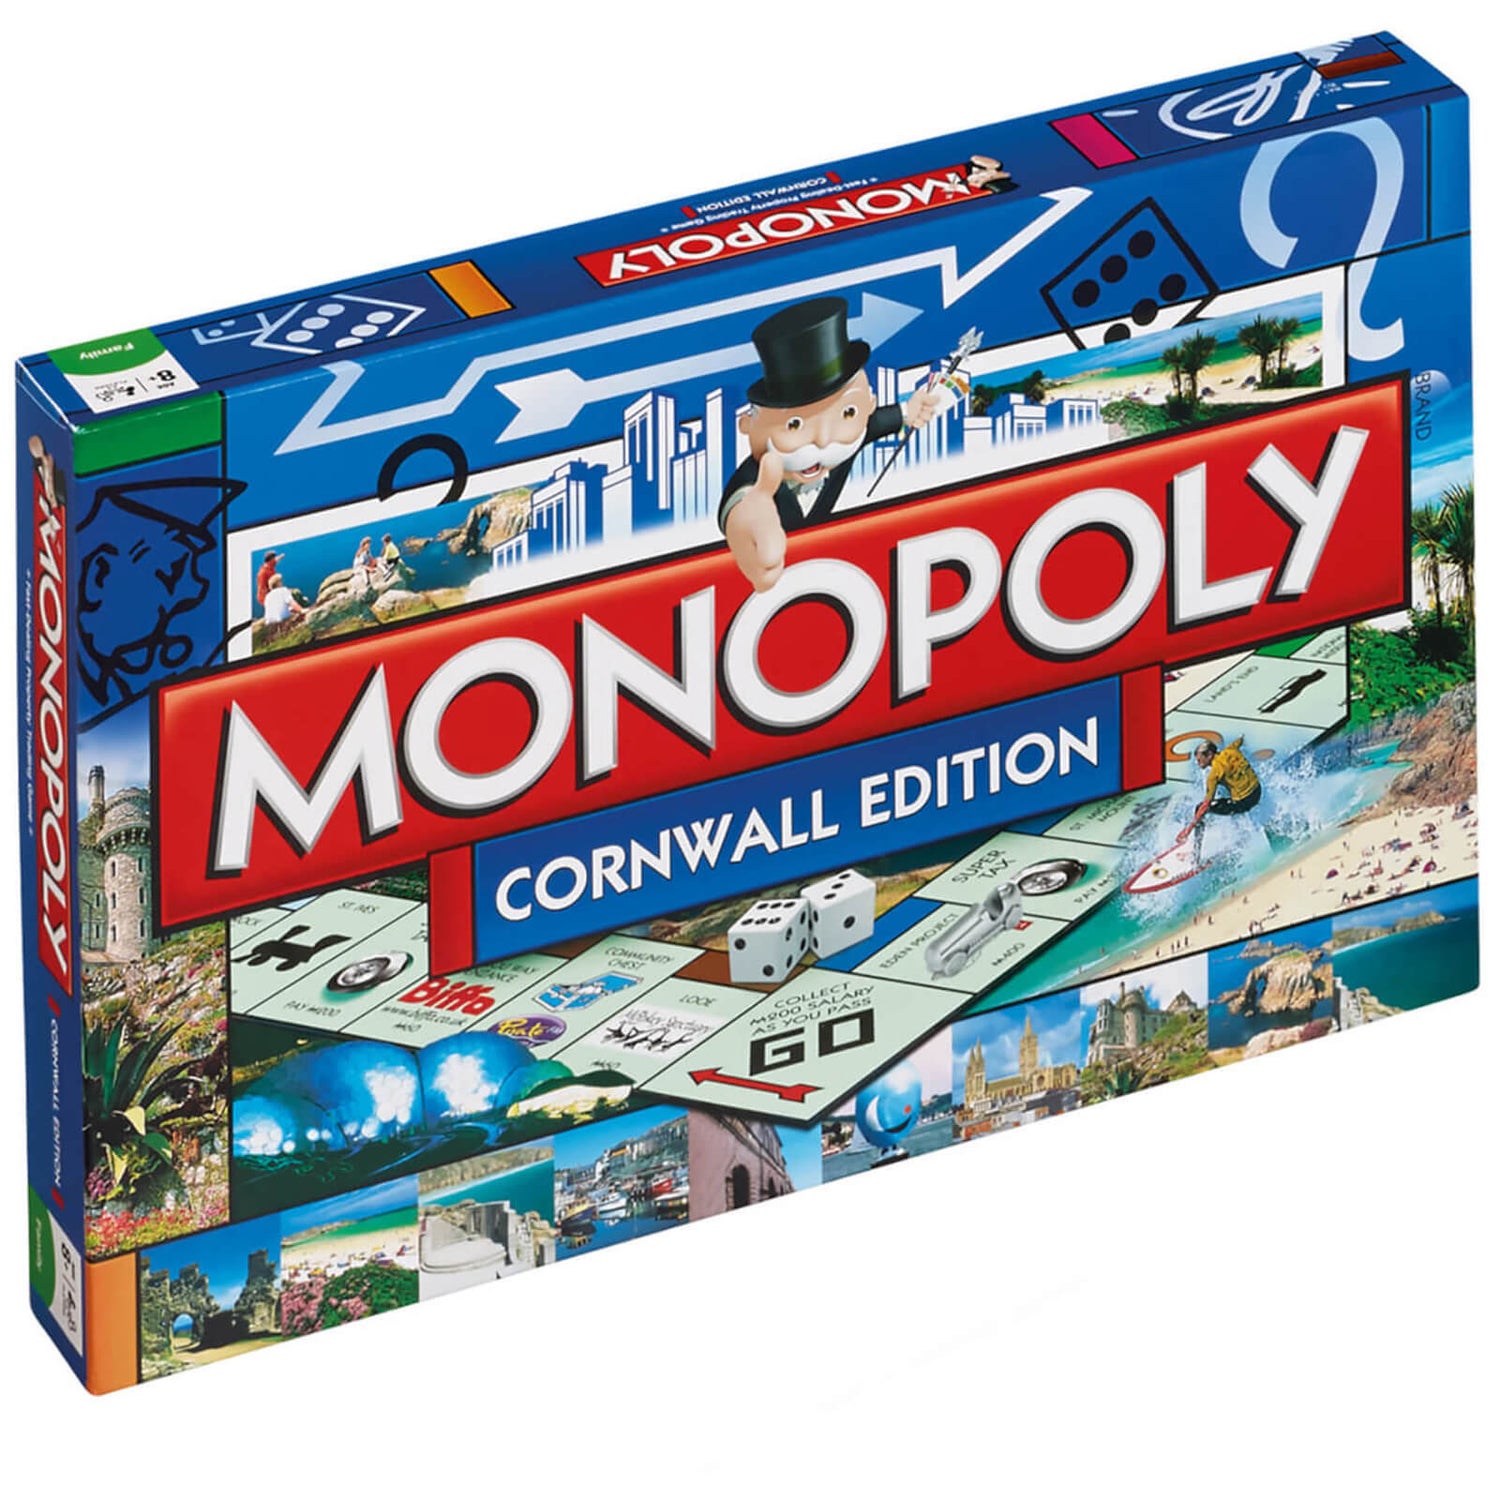 Monopoly Board Game - Cornwall Edition